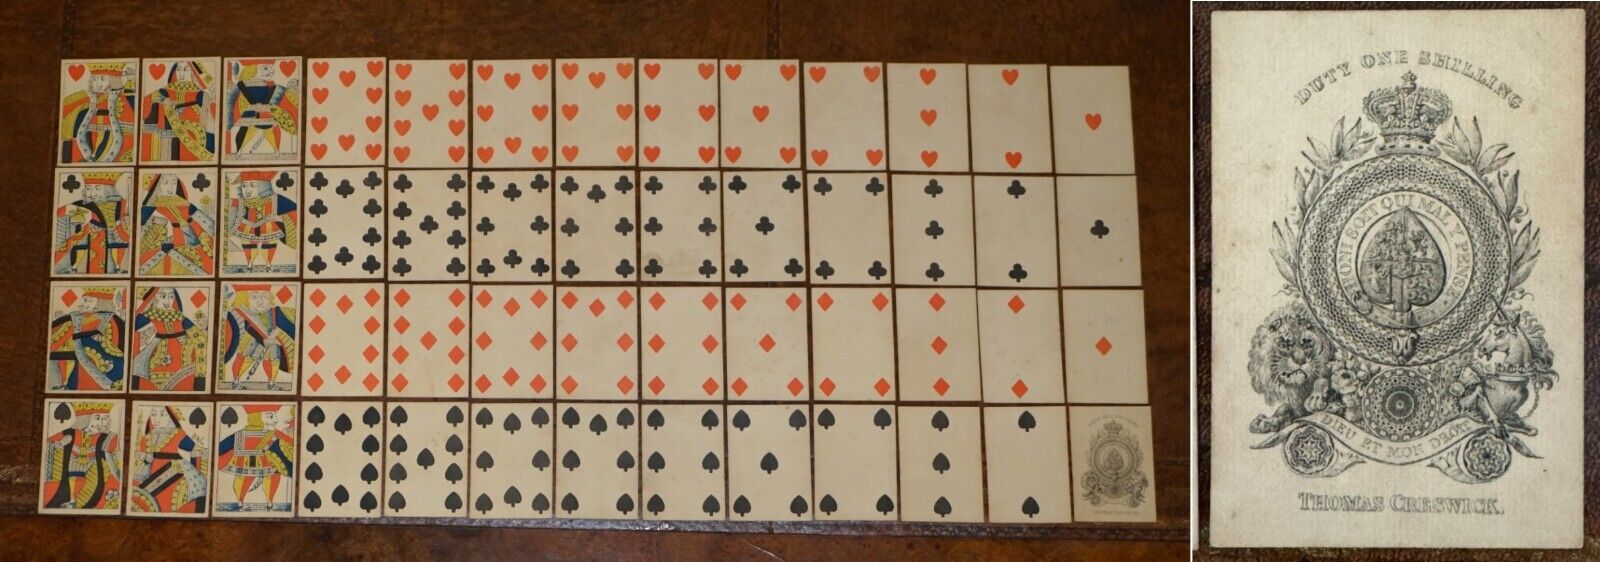 ANTIQUE 1830 THOMAS CRESWICK GEORGIAN PLAYING CARDS WITH FIZZLE ACE OF SPADES